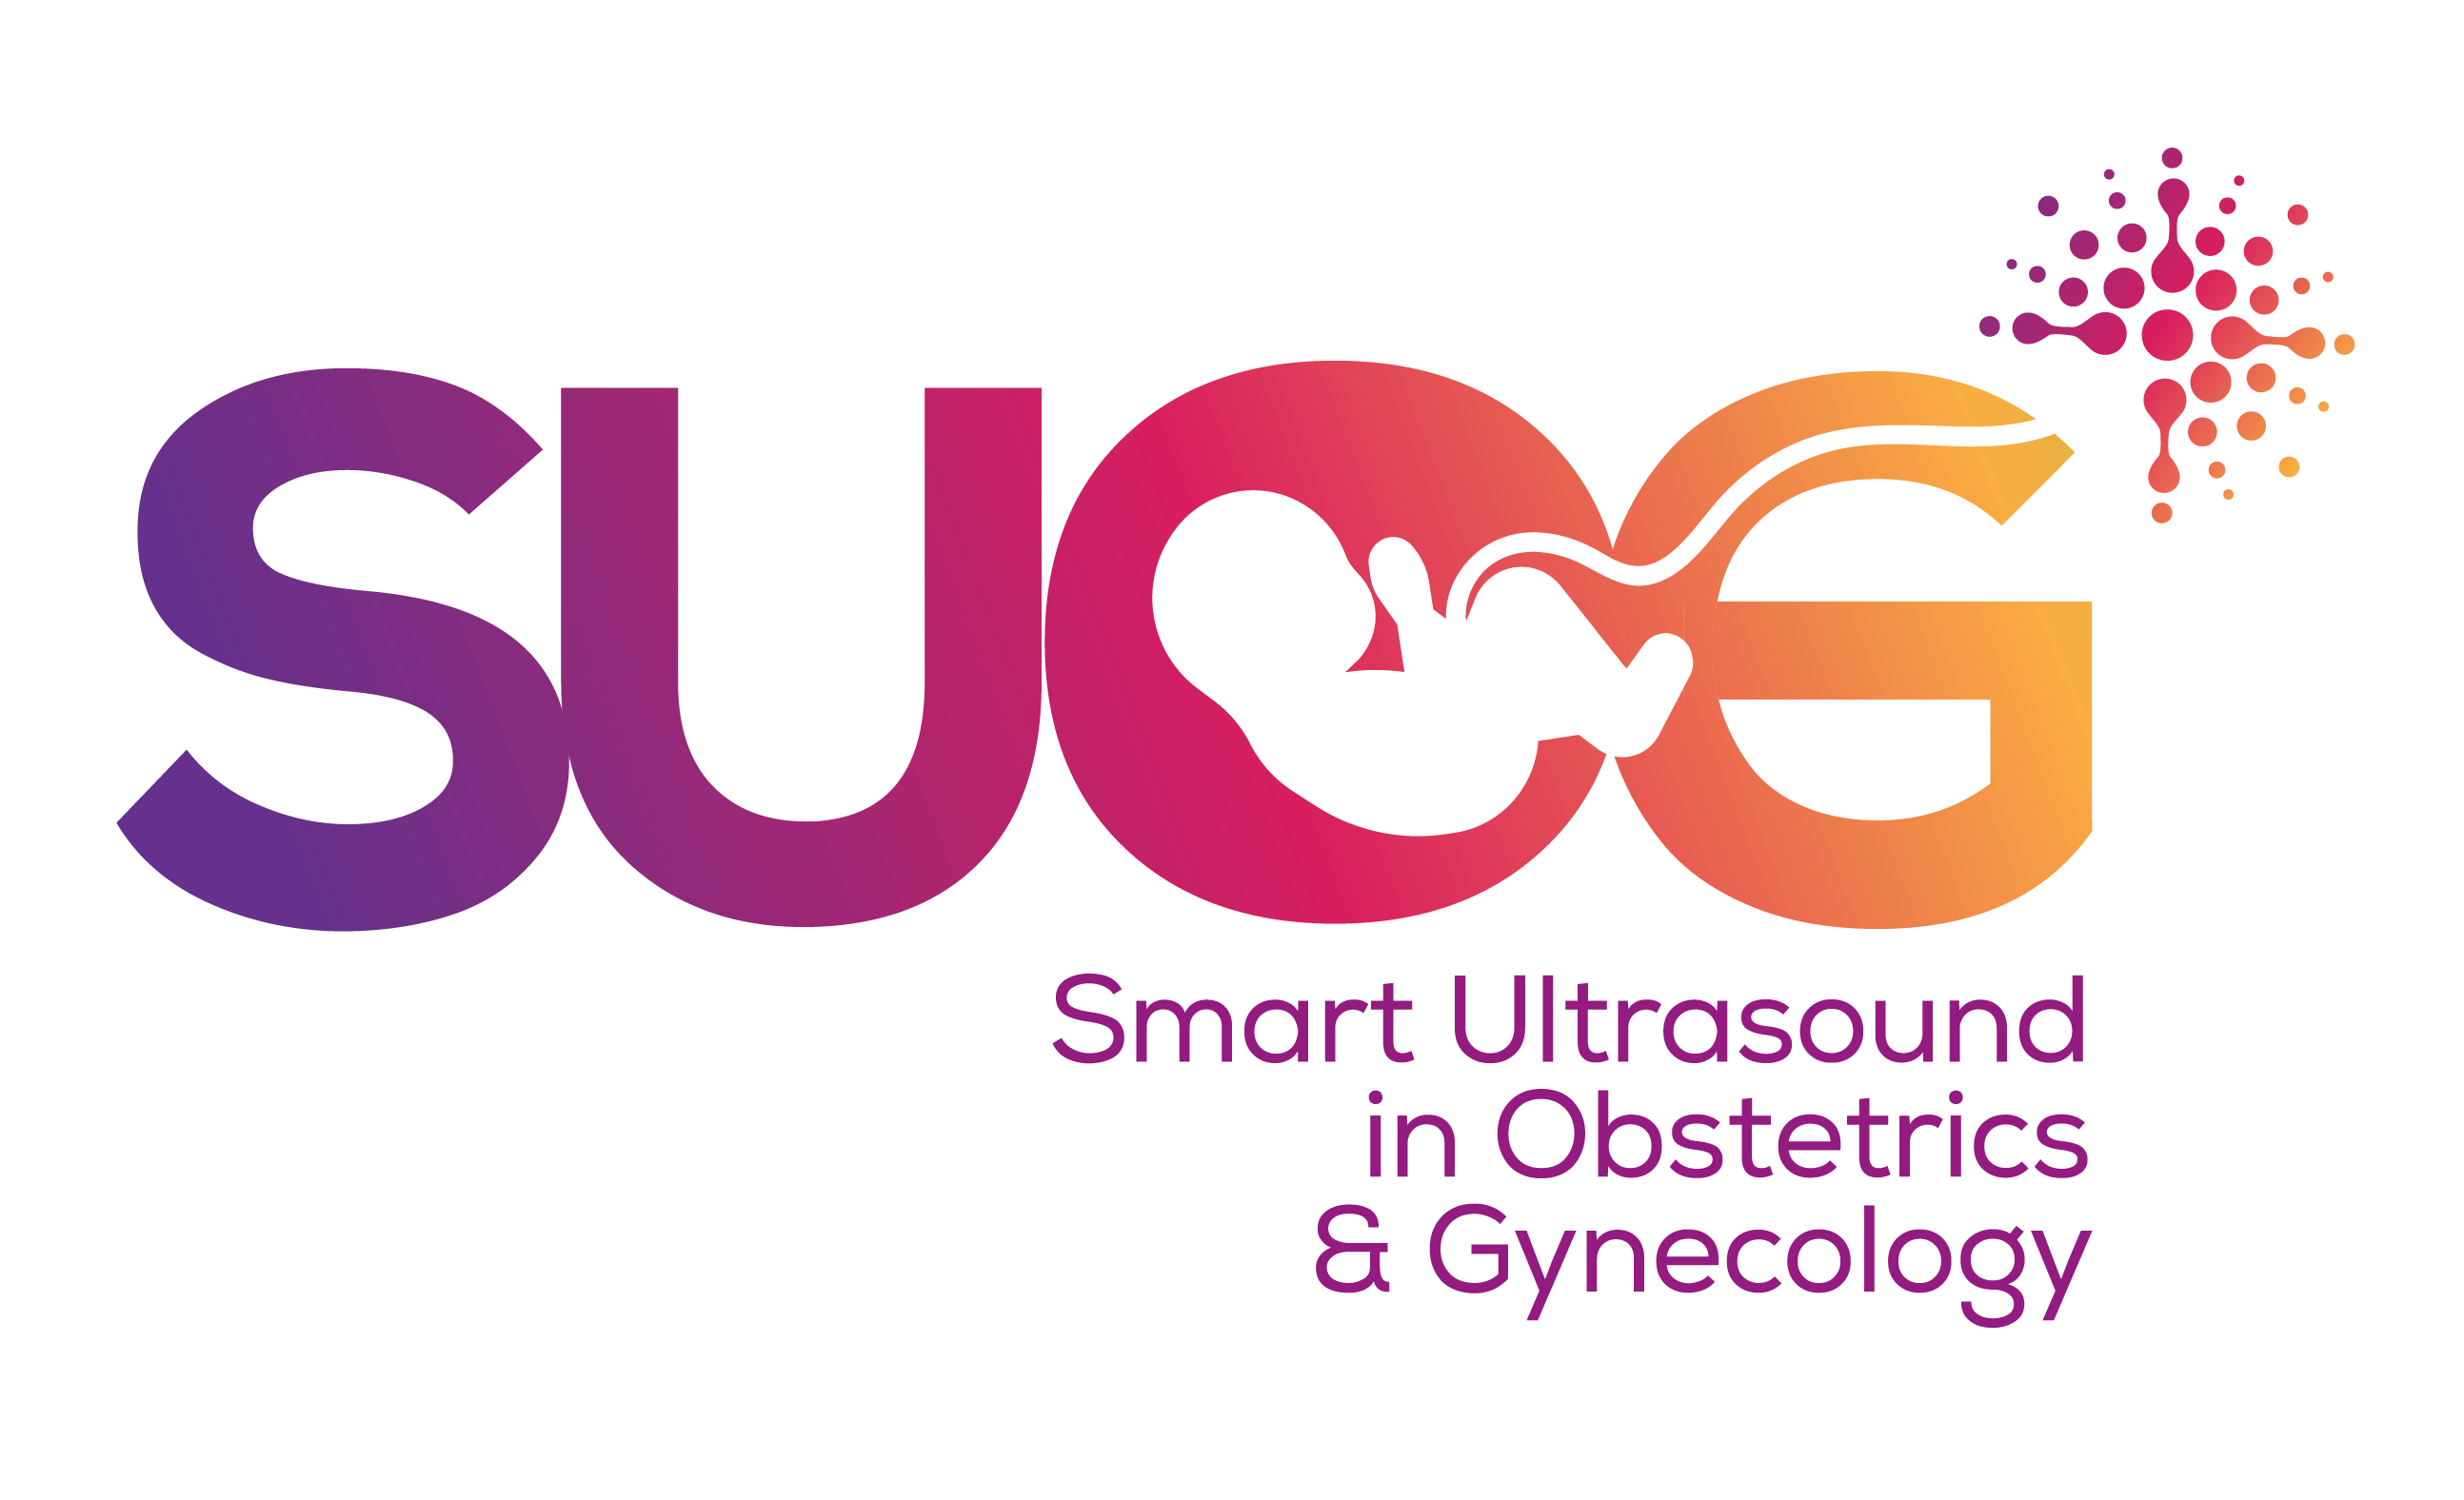 Smart Ultrasound in Obstetrics and Gynecology (SUOG)